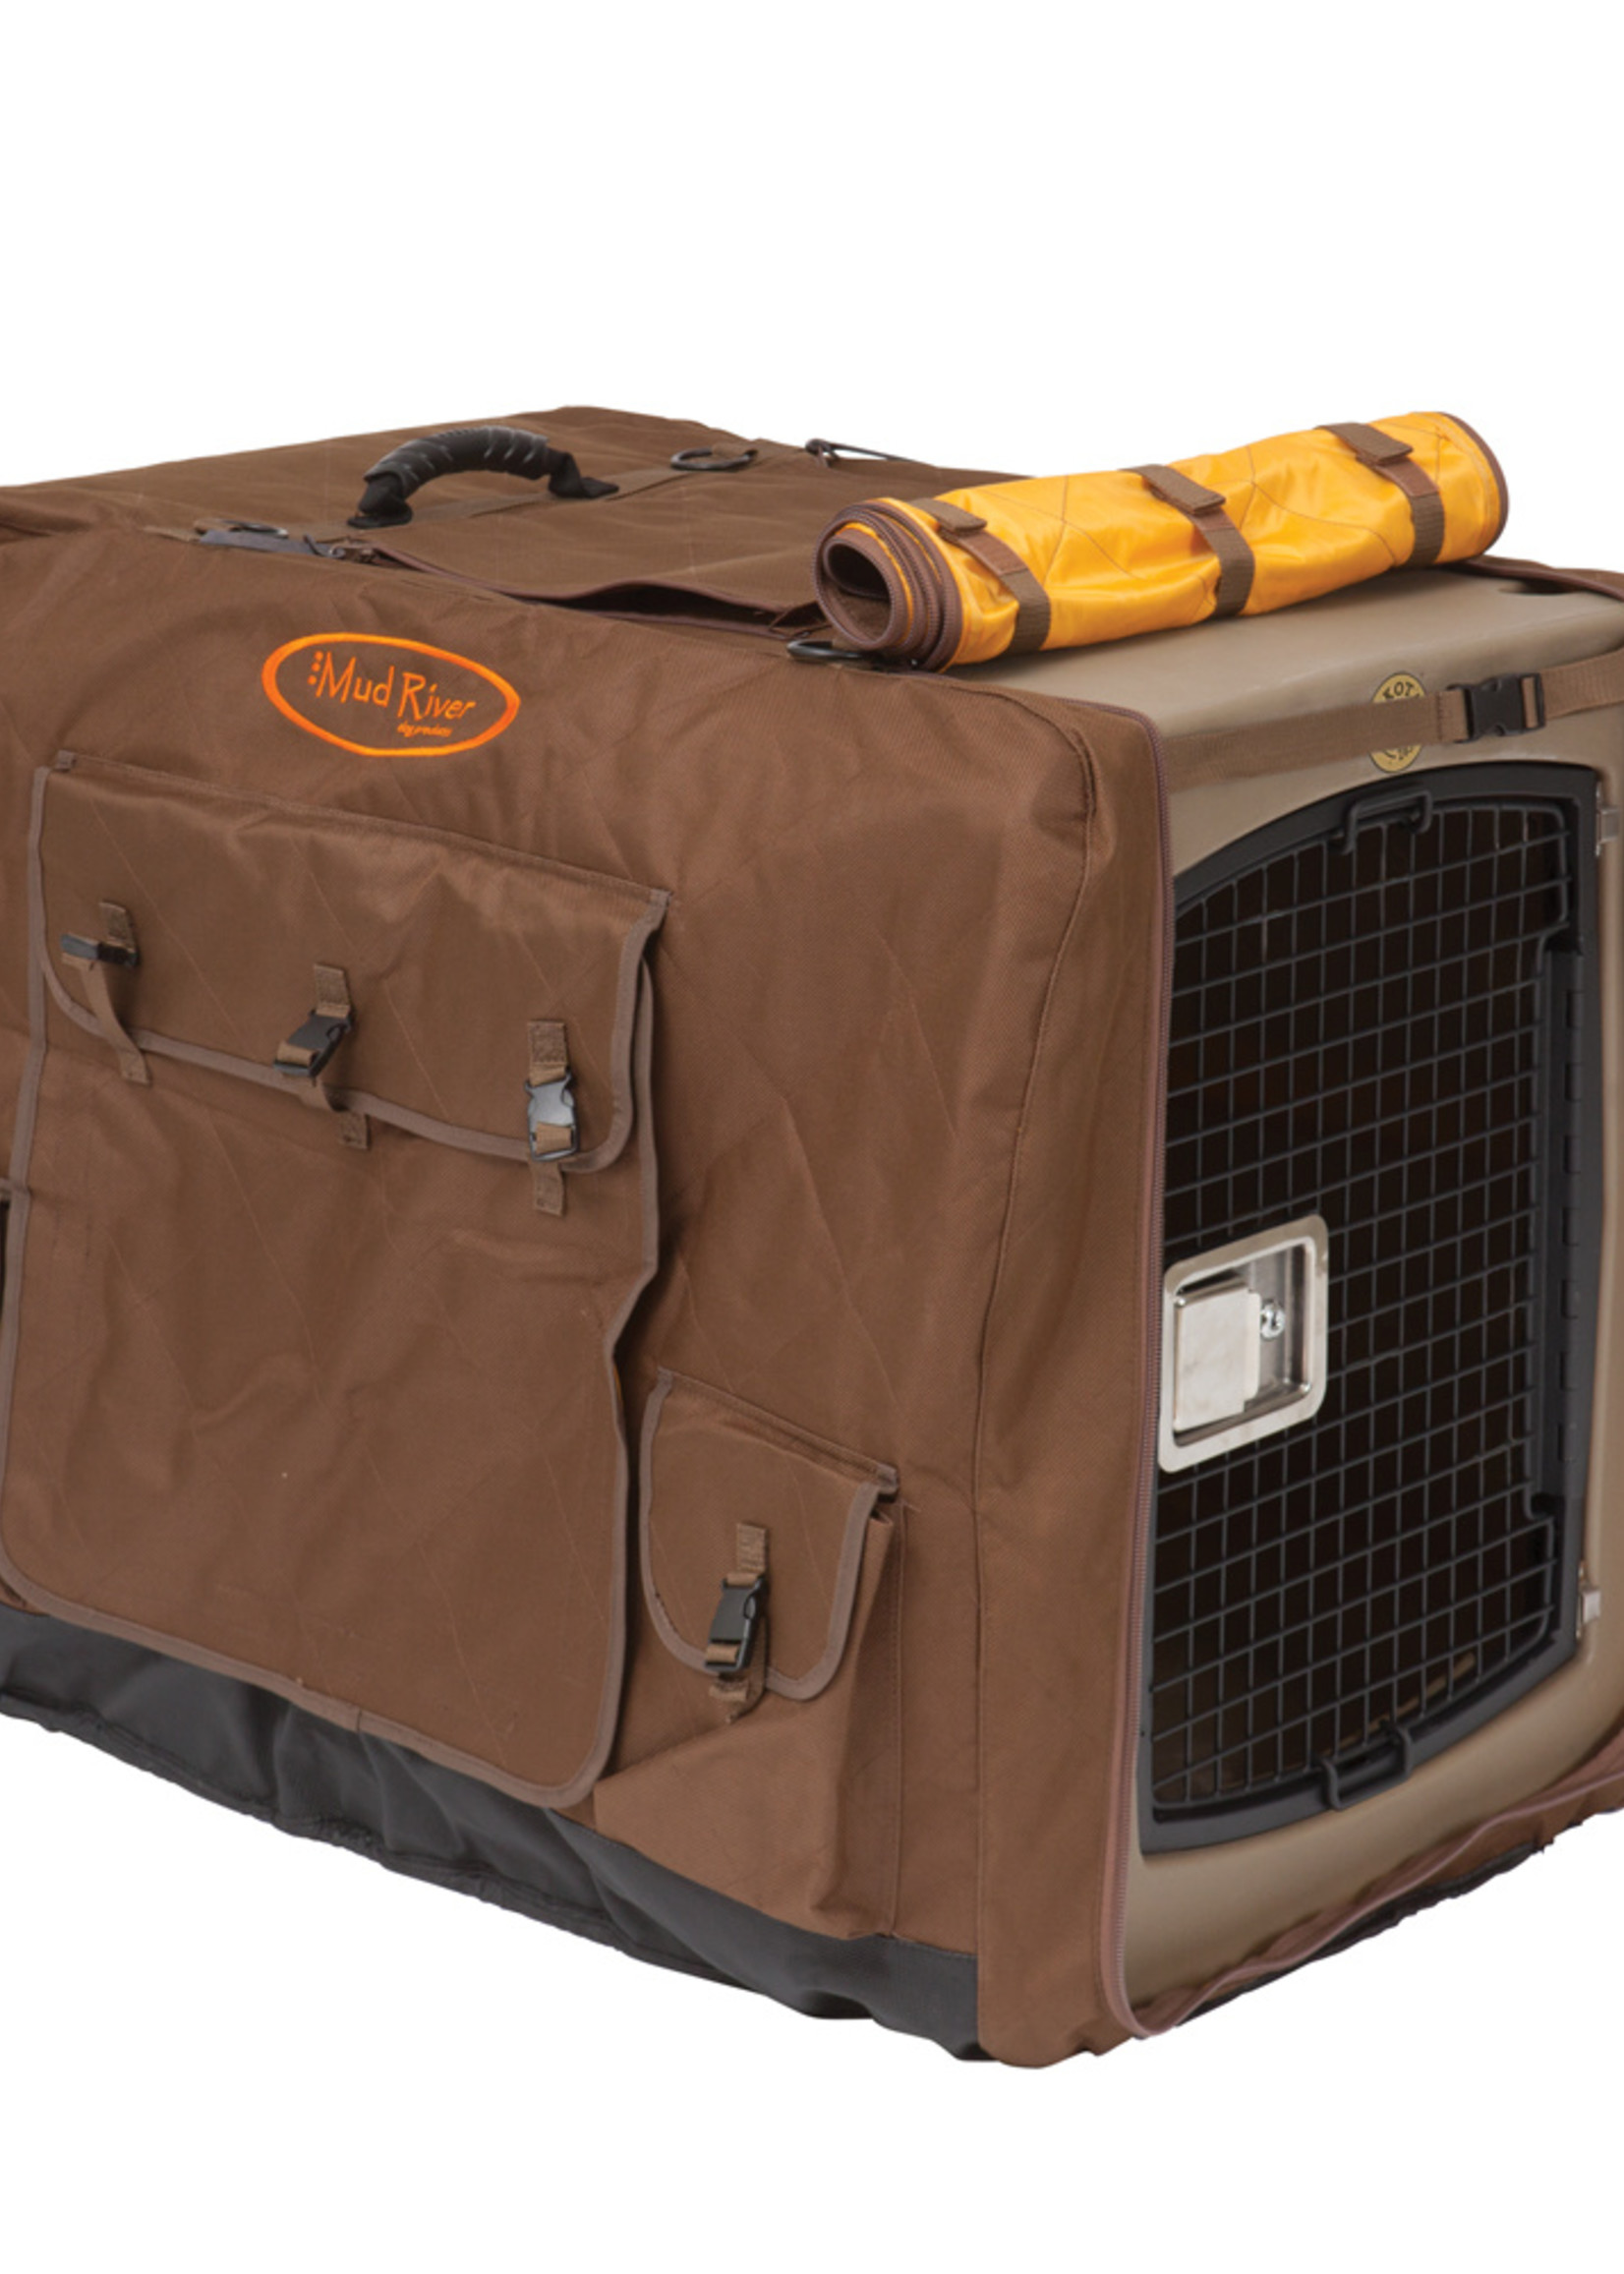 Dakota 283 Mud River Dixie Insulated Crate Cover - Extended Large